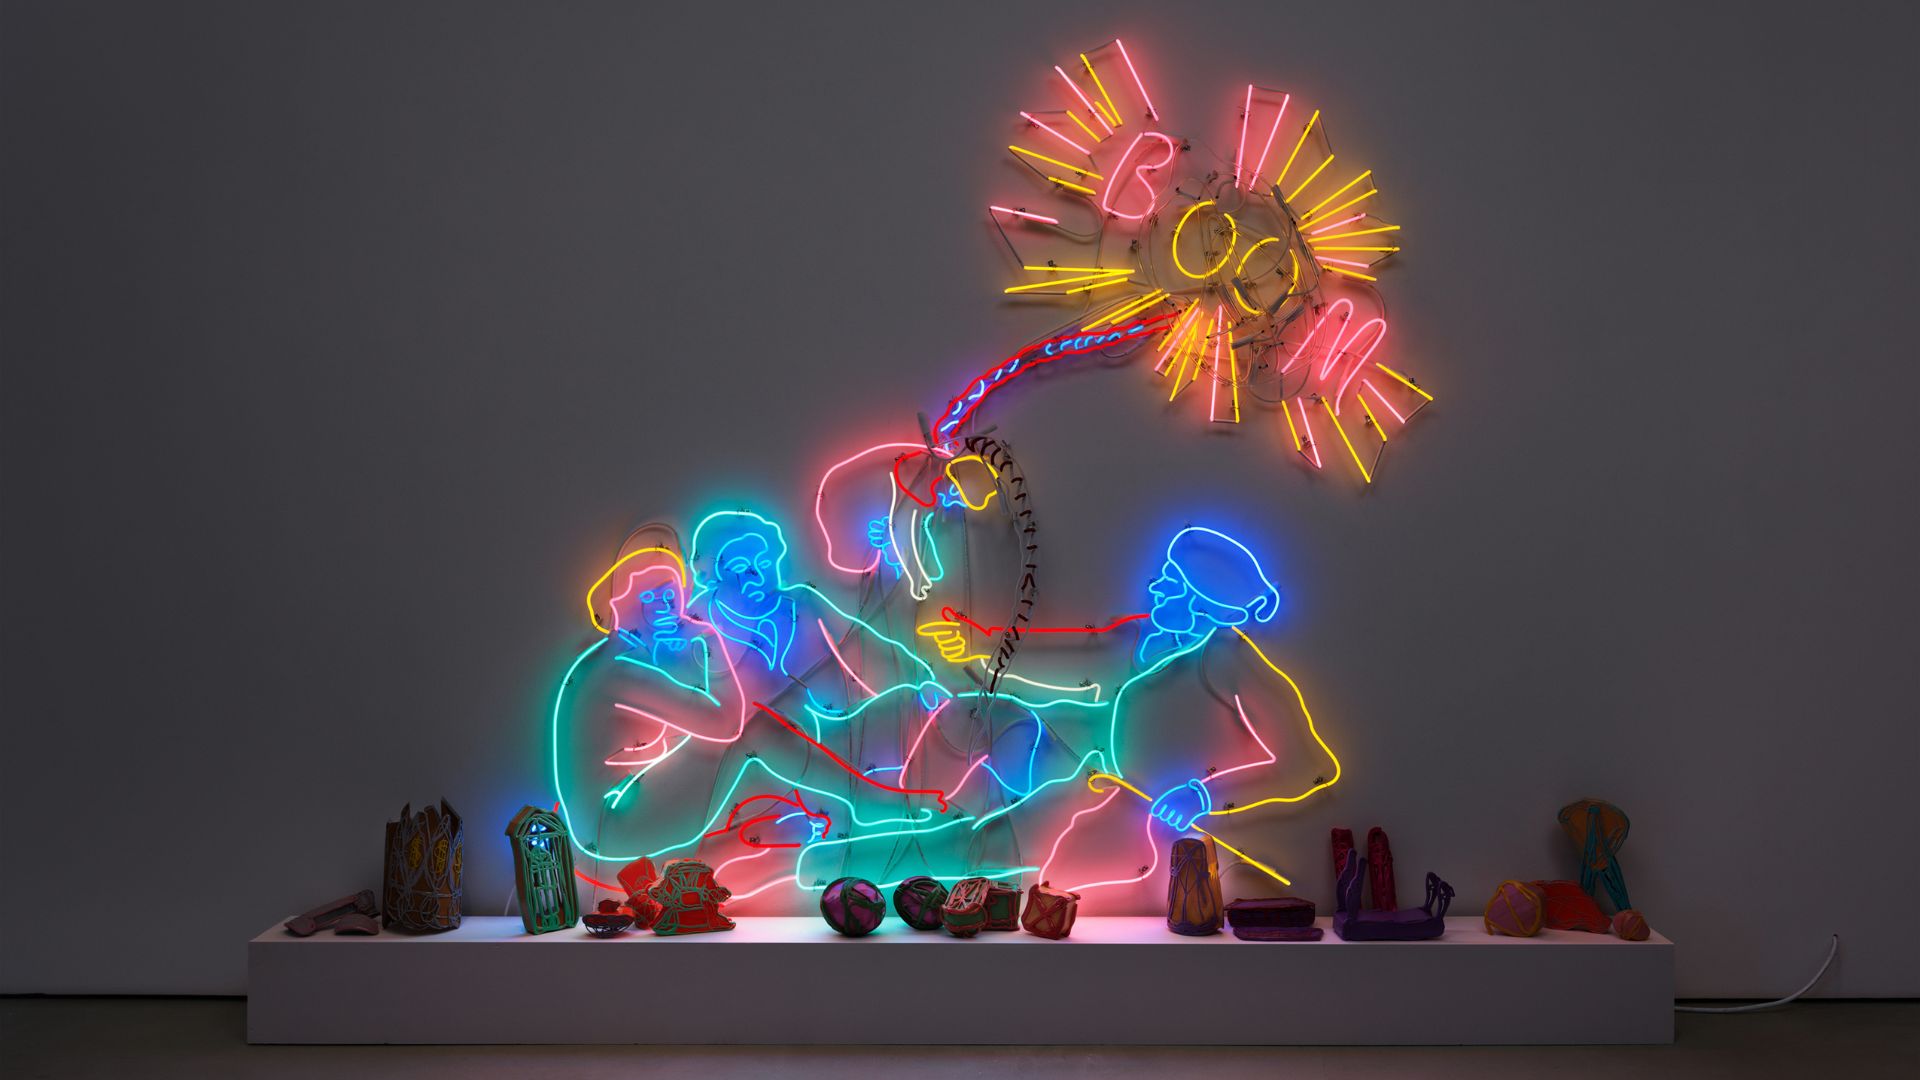 Jacolby Satterwhite's exhibition at the Contemporary Art Museum St. Louis includes animated neon sculptures.